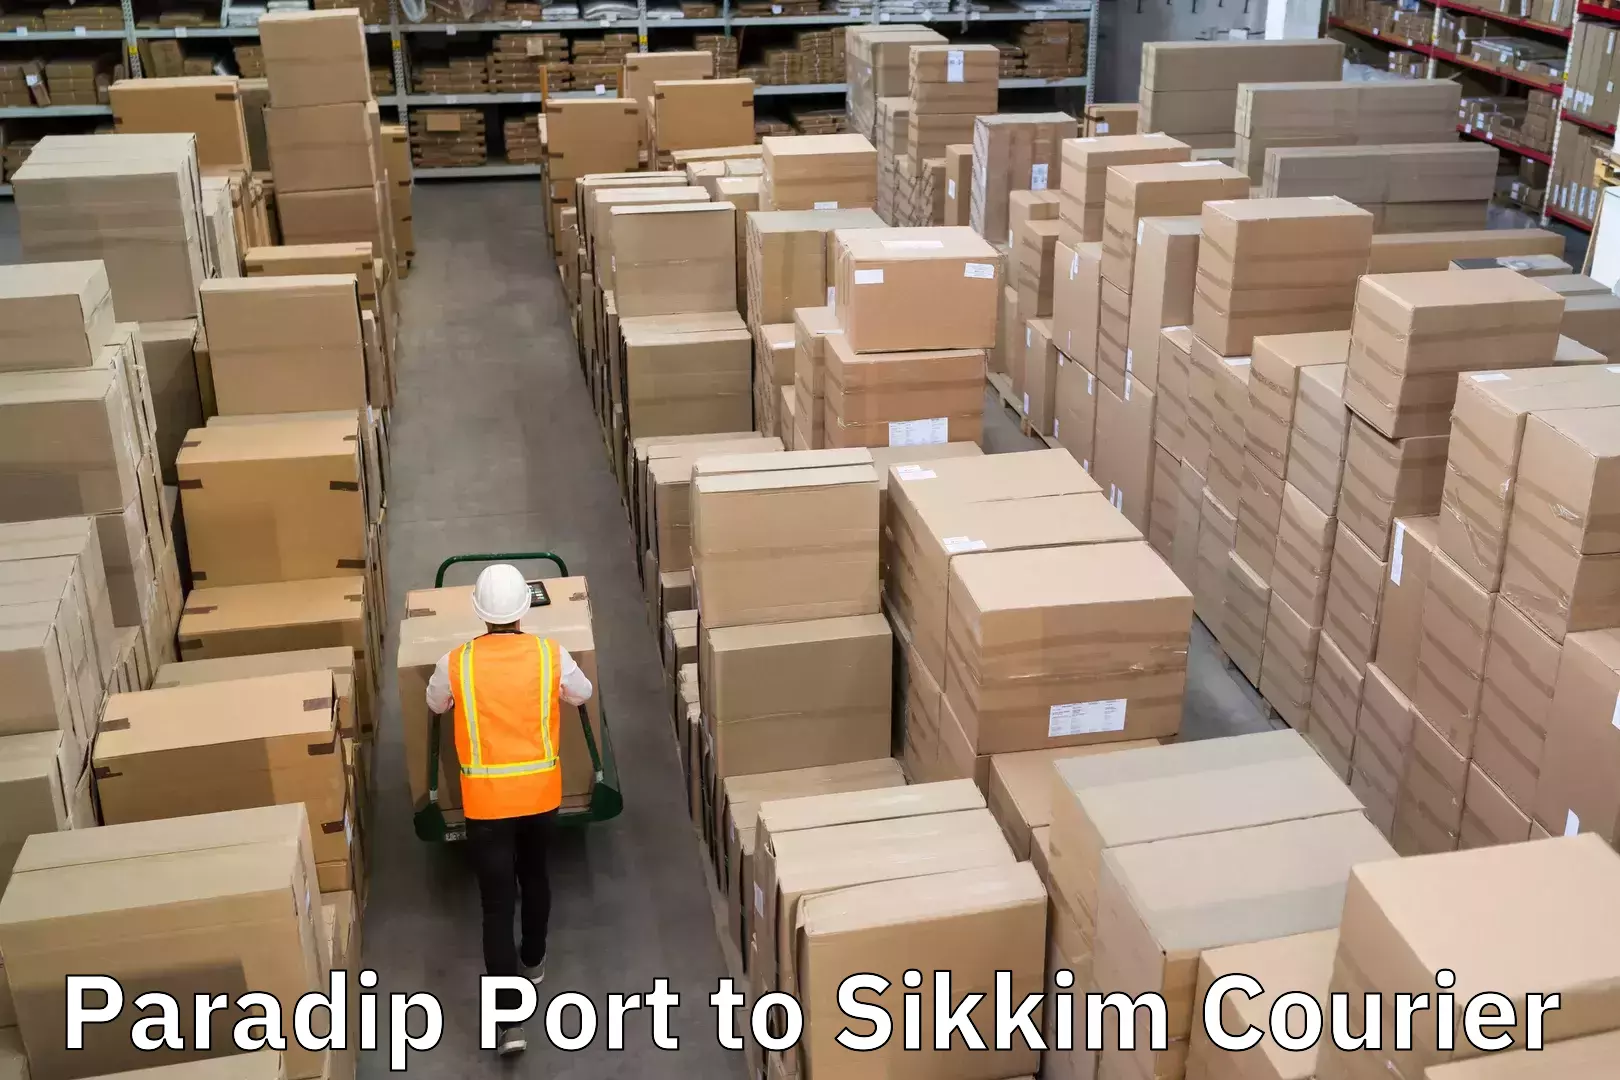 Global parcel delivery Paradip Port to Sikkim